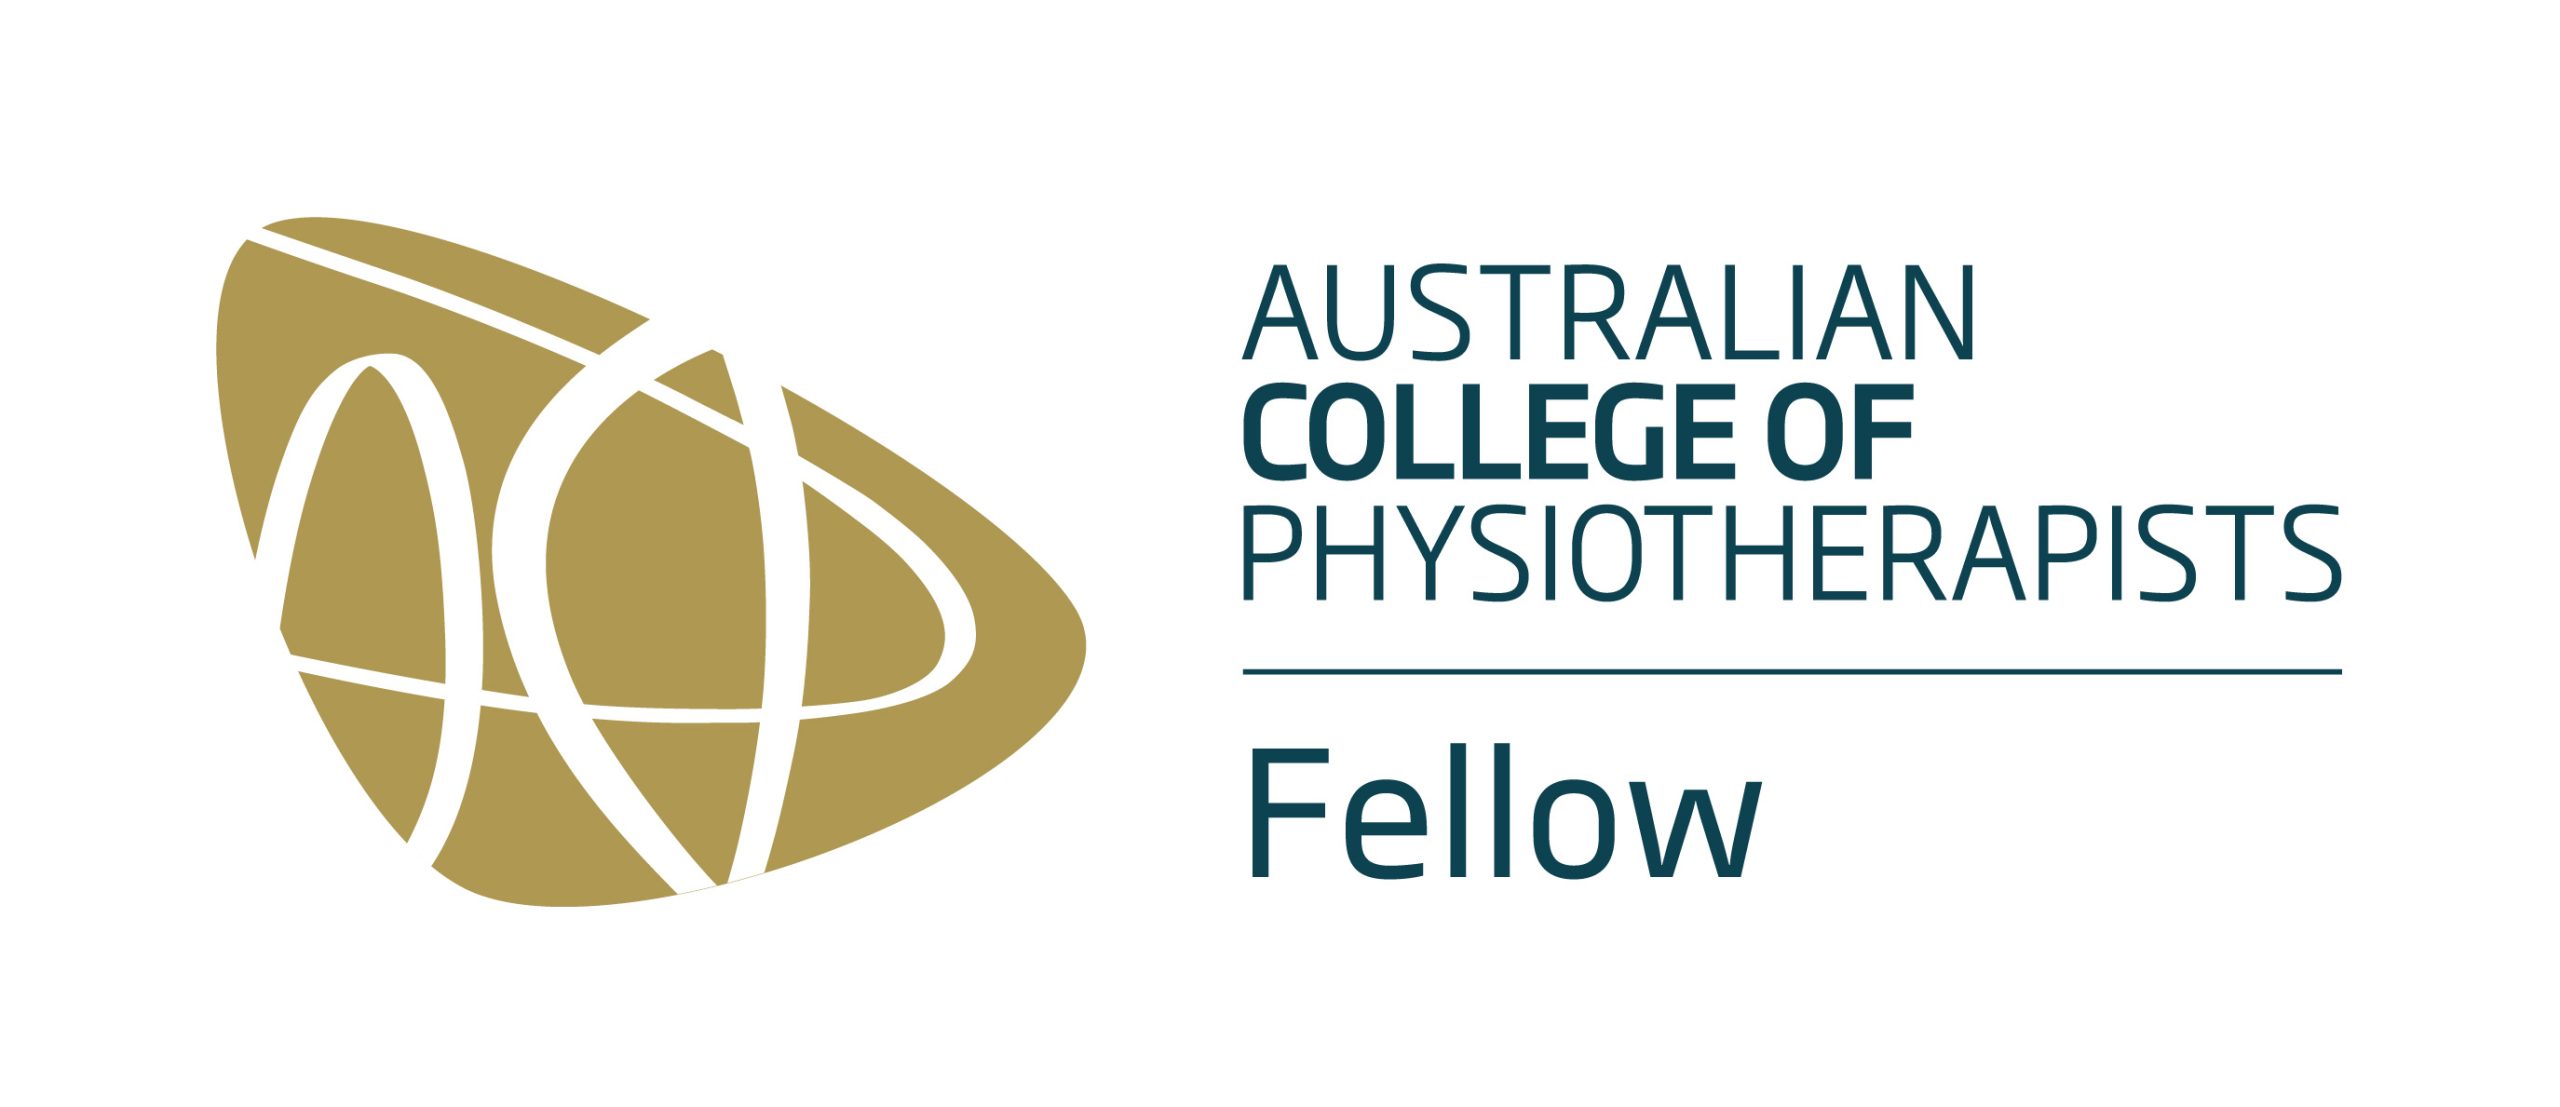 Australian College of Physiotherapists Fellow